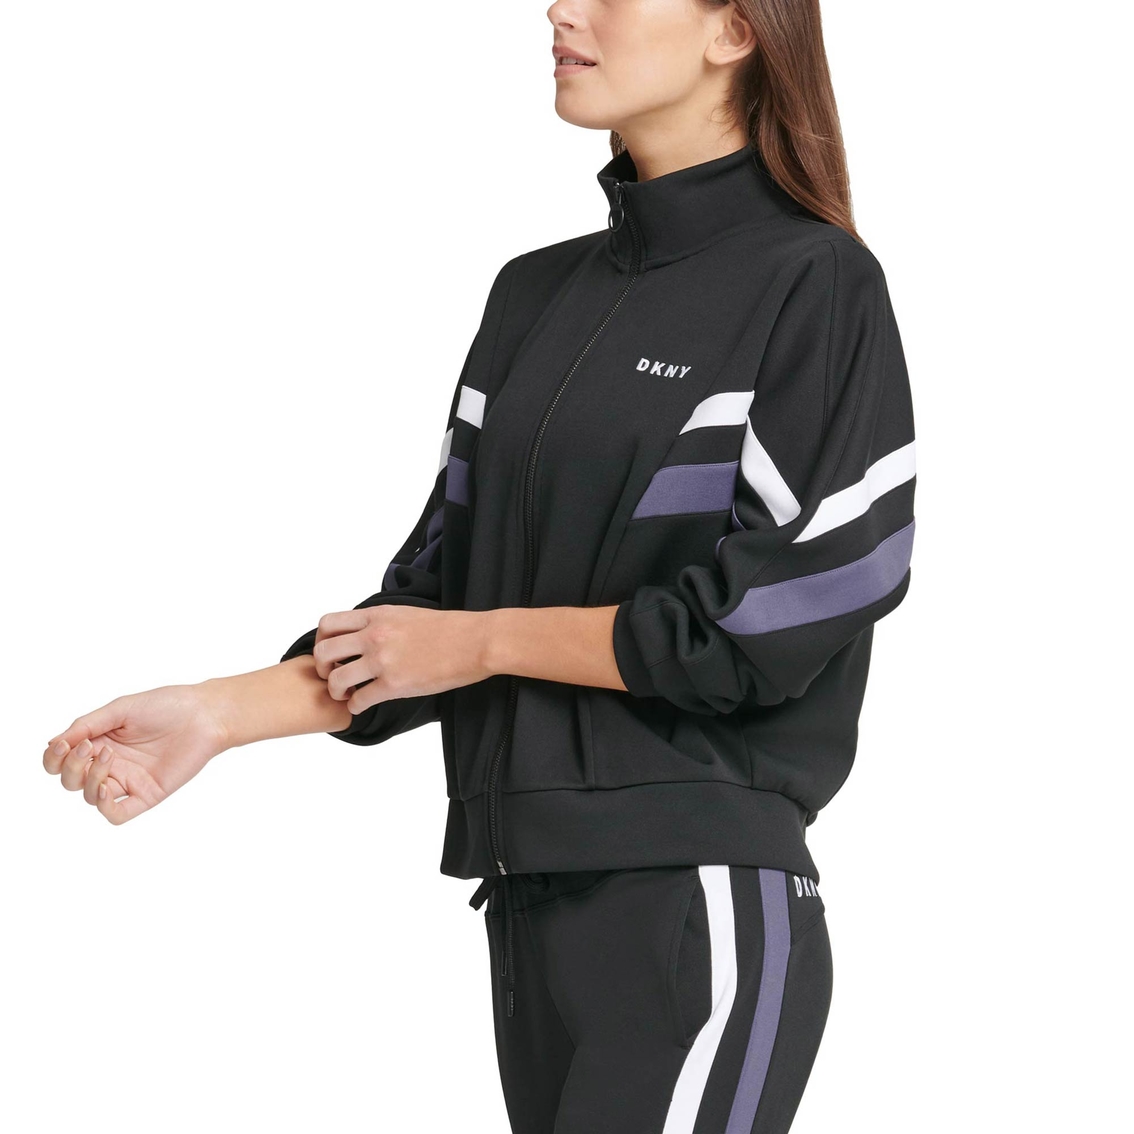 DKNY Colorblock Track Jacket - Image 3 of 3